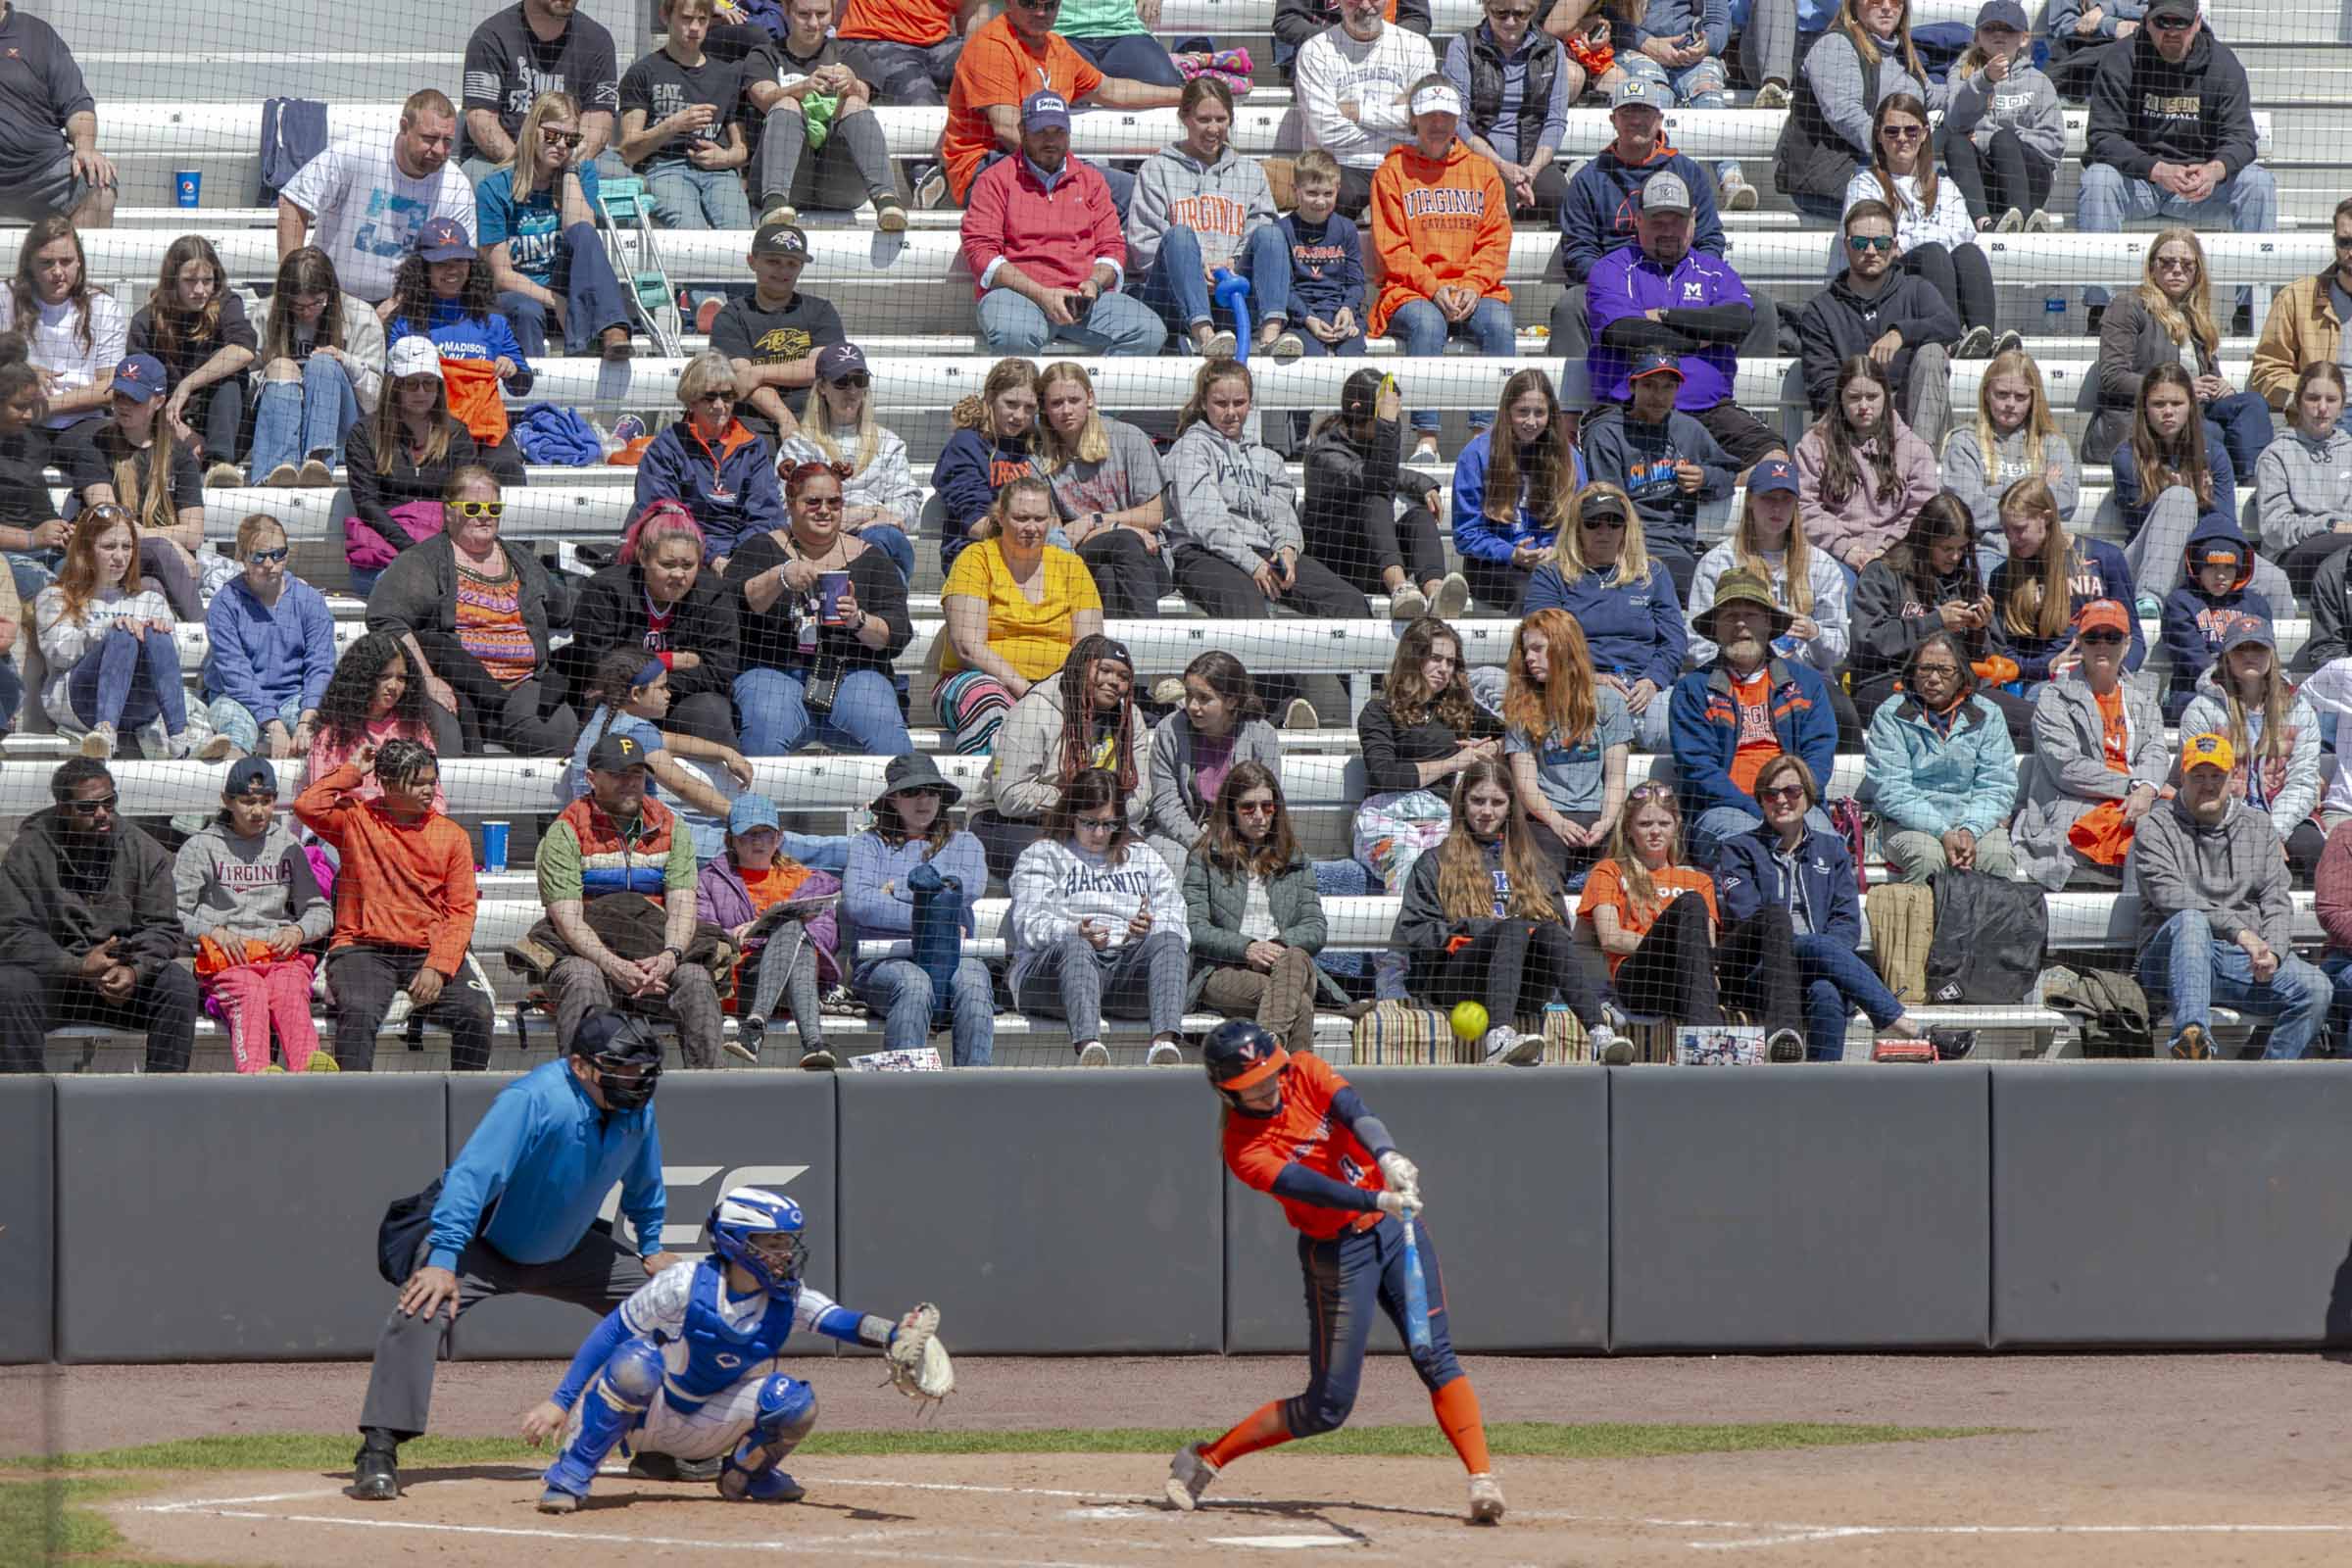 A UVA softball player at bat, hits the ball. Fans look on from the crowded bleachers.